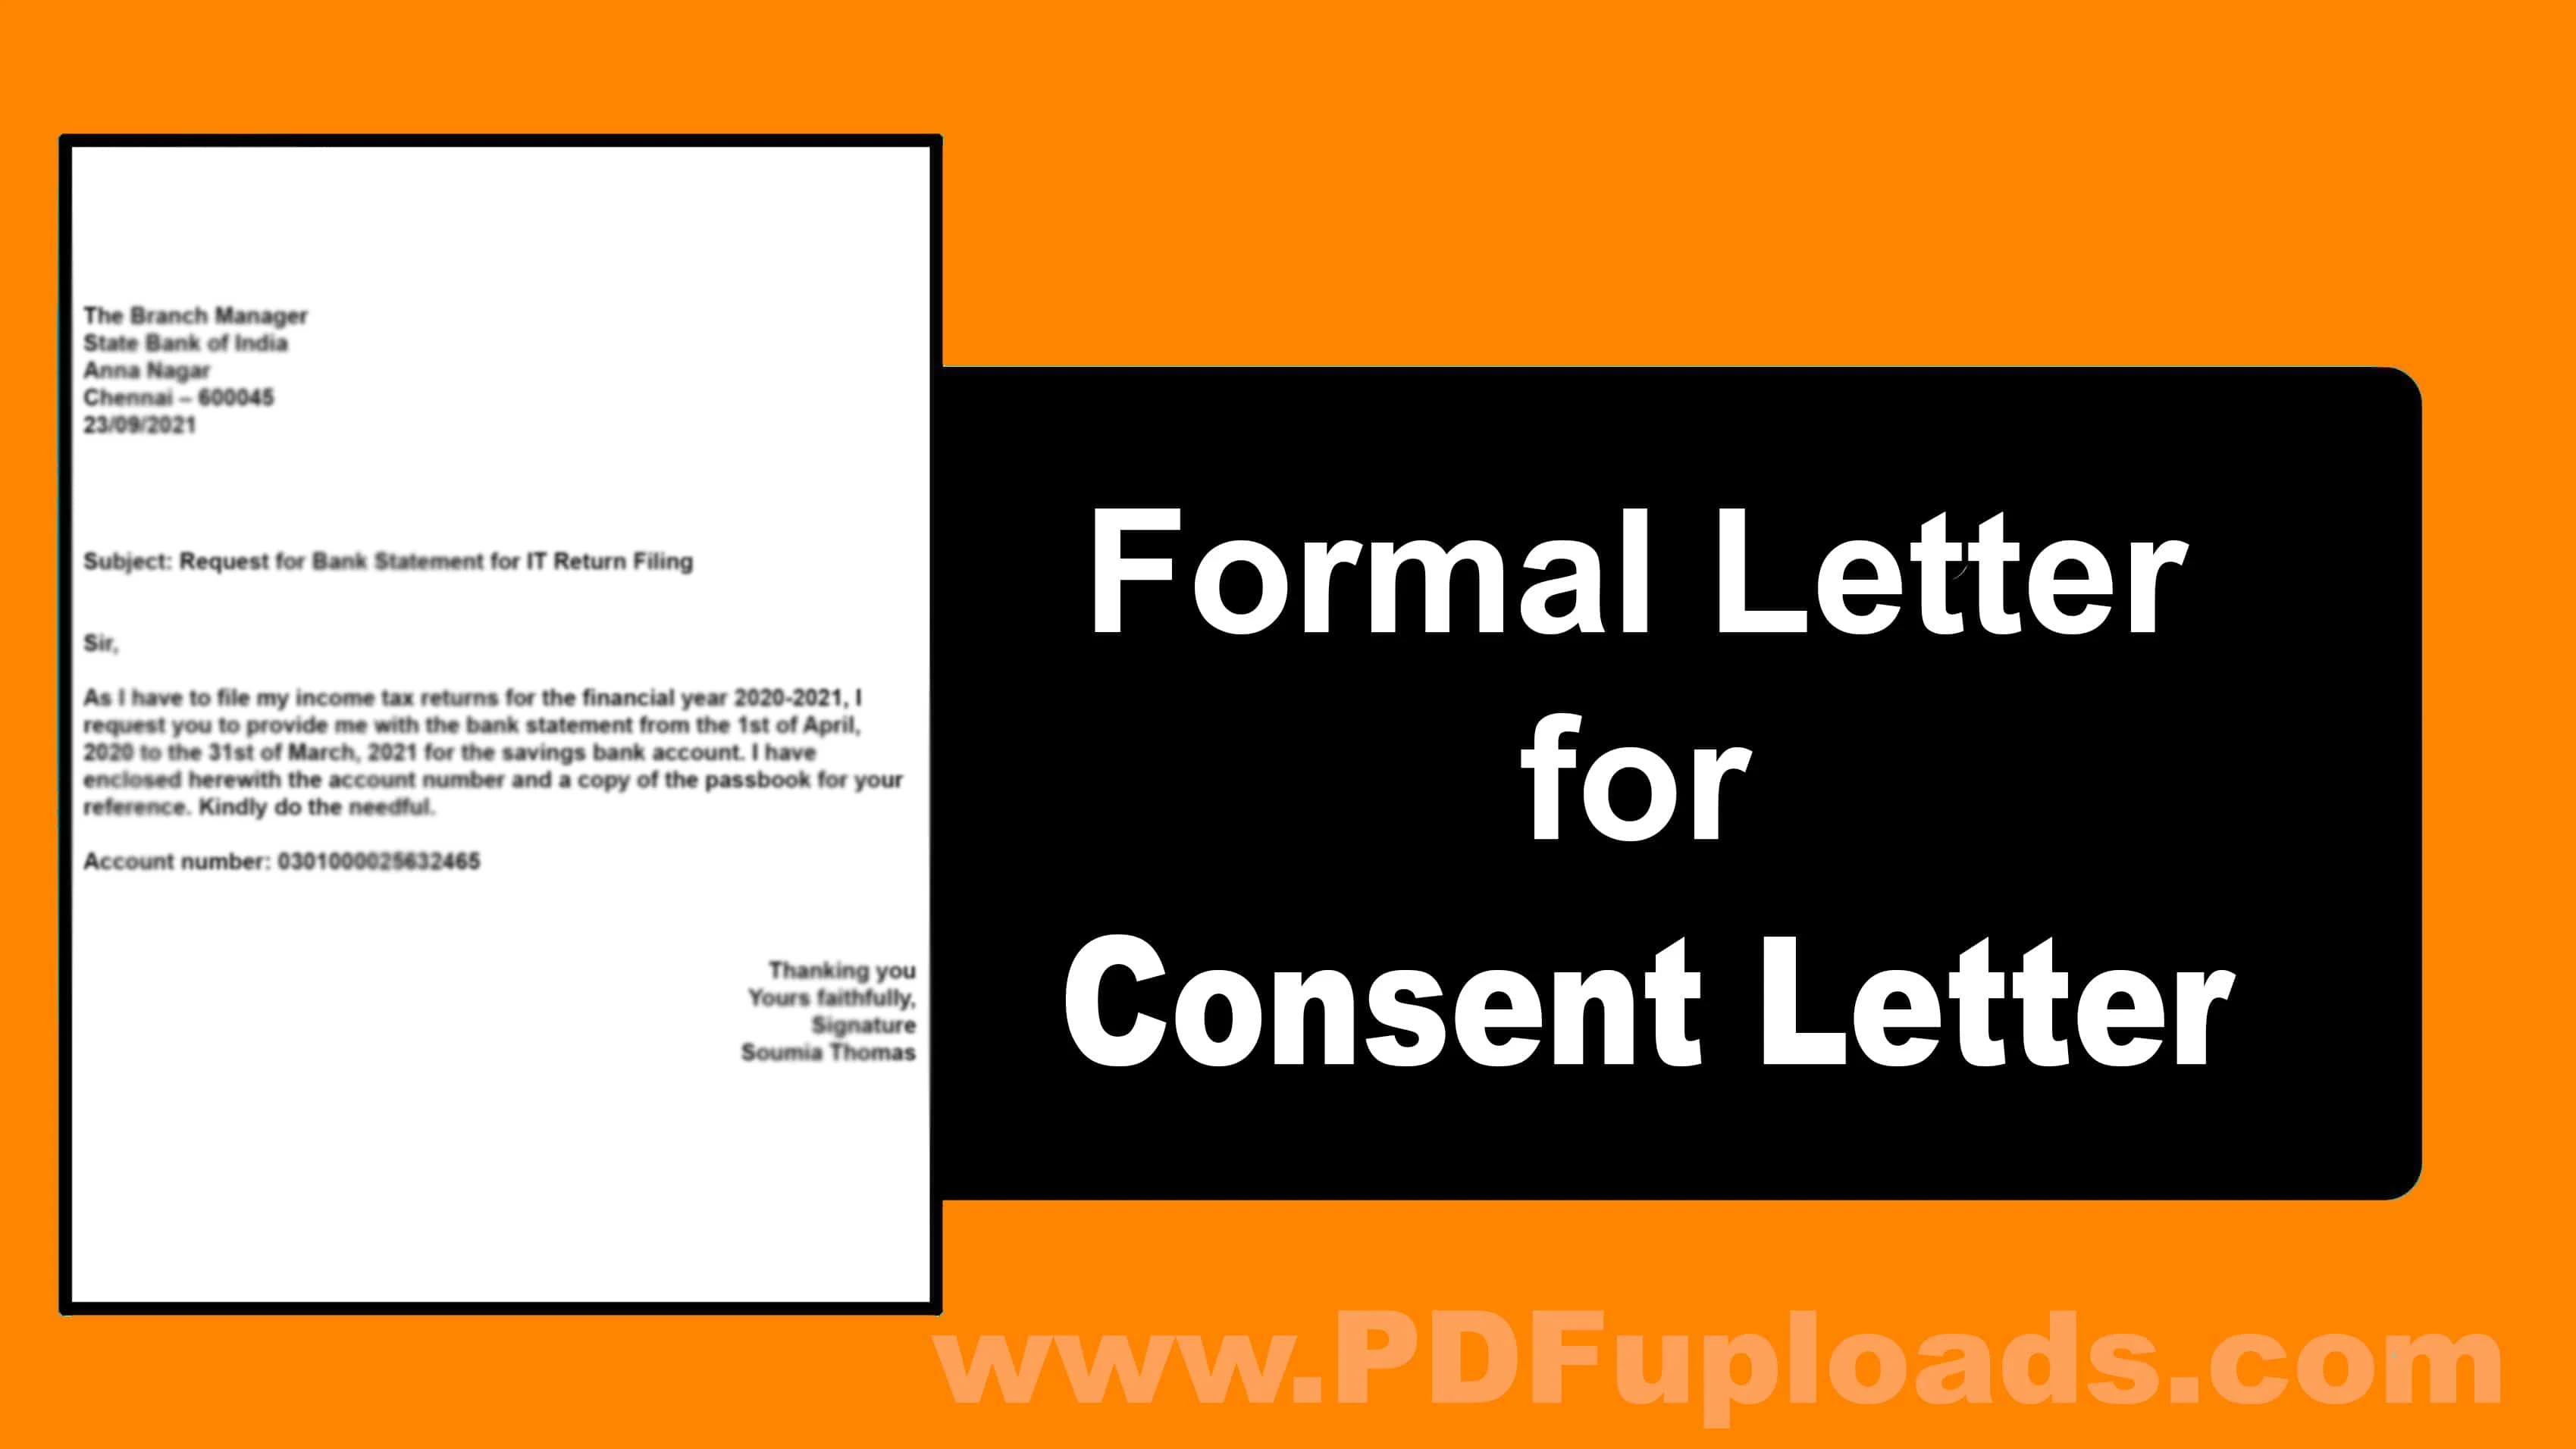 Consent Letter - How to Write a Consent Letter? Format and Samples